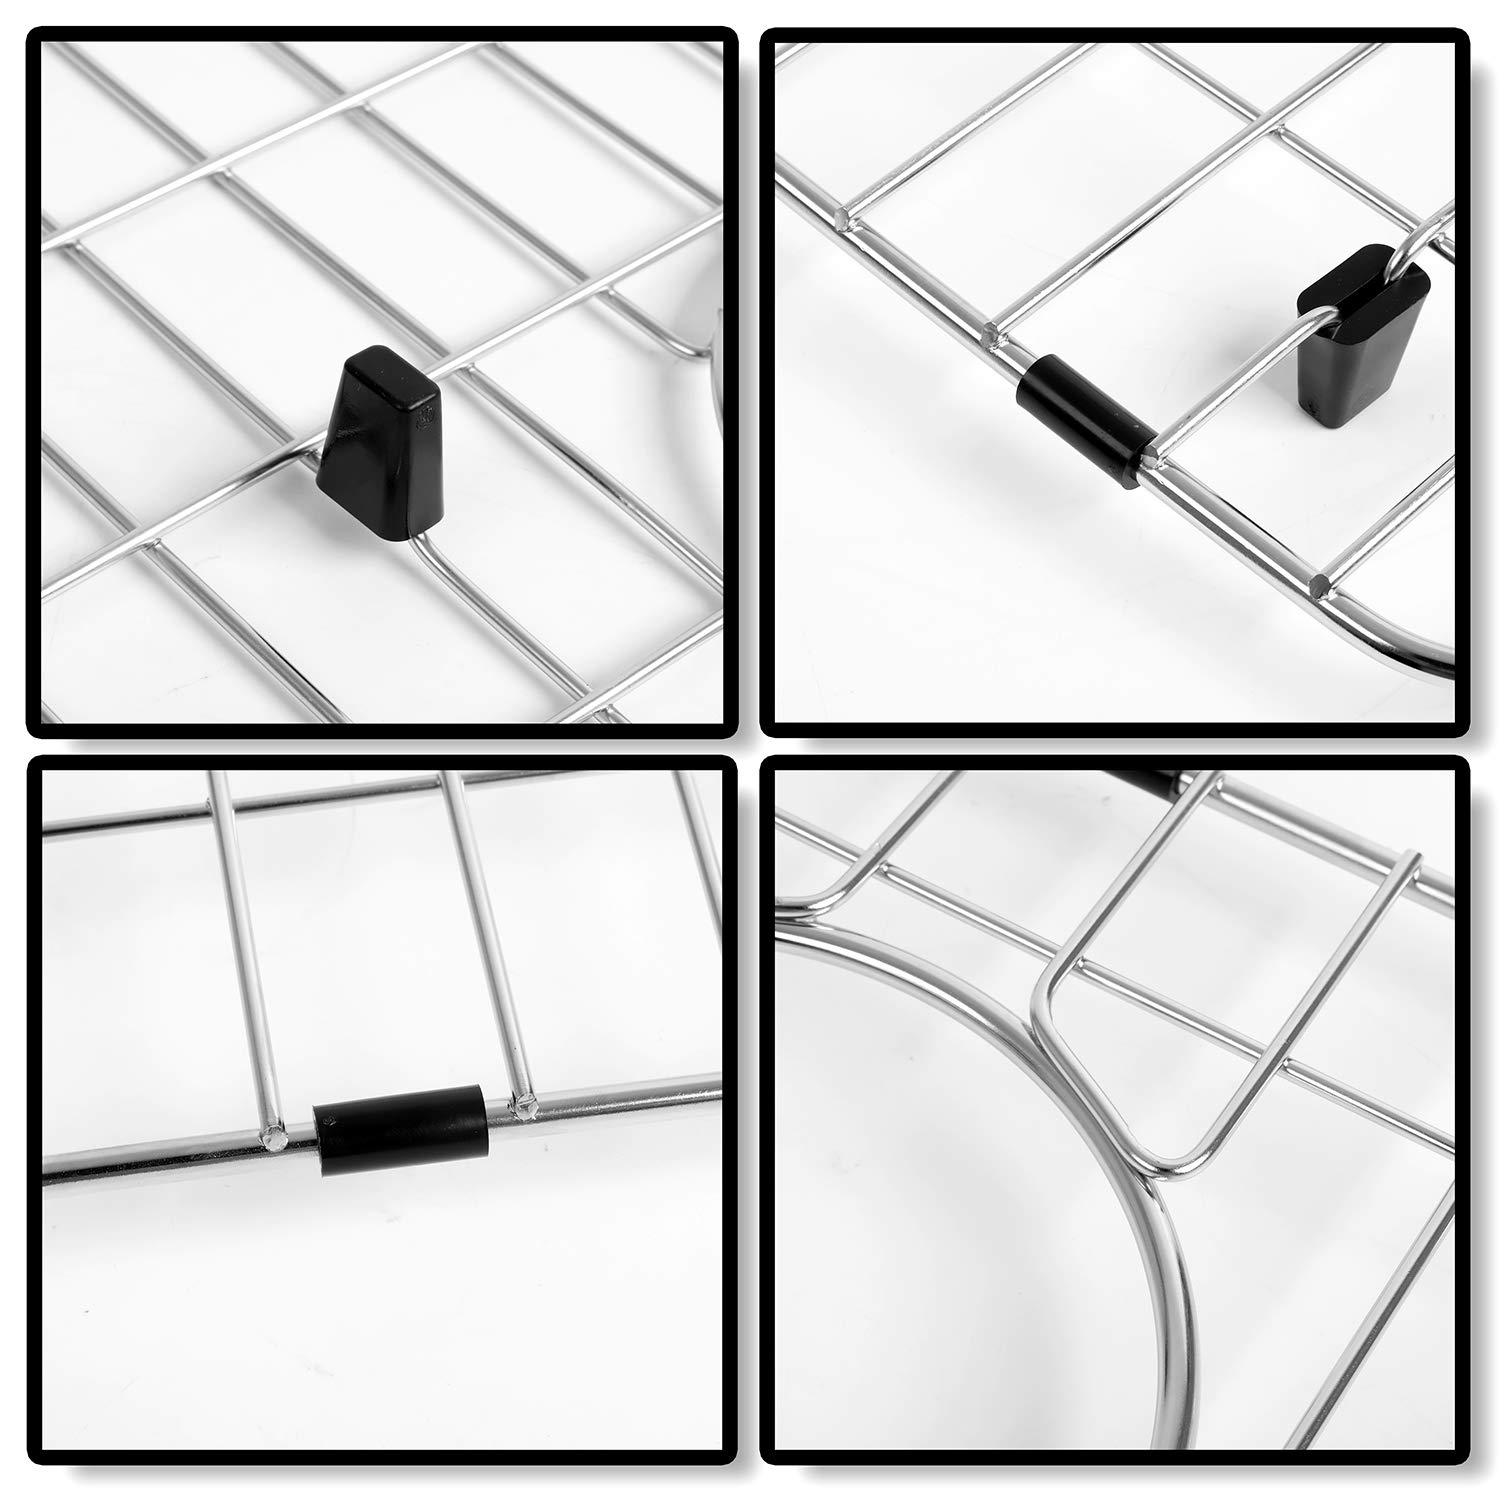 MONSINTA Kitchen Sink Grate and Sink Protectors, Stainless Steel Sink Grid 27 3/16" x 14 5/16" with Center Drain for Single Sink Bowl, Sink Grids Sink Bottom Grid for Kitchen Sink